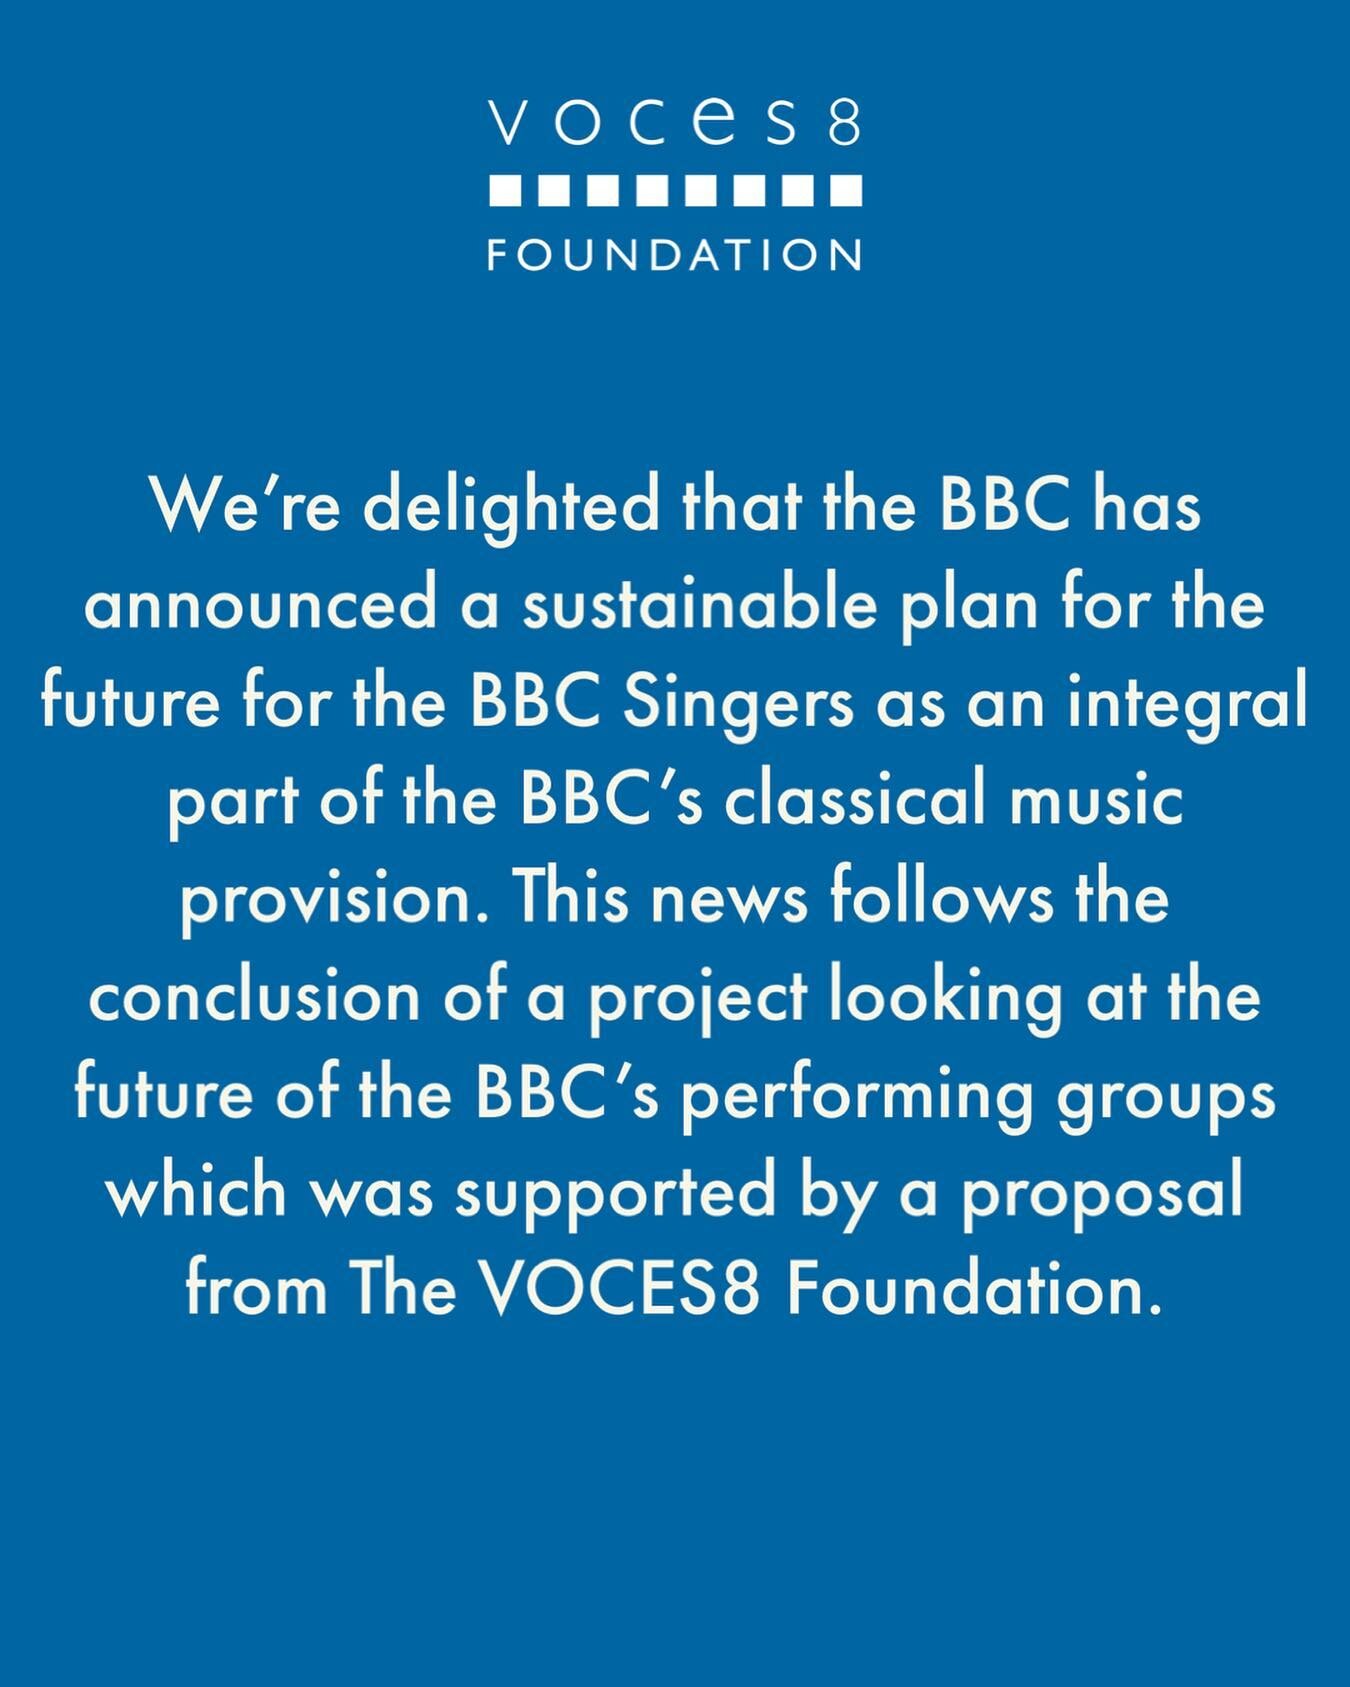 To read the full statement, visit voces8.foundation, link in our bio.

@bbc_singers